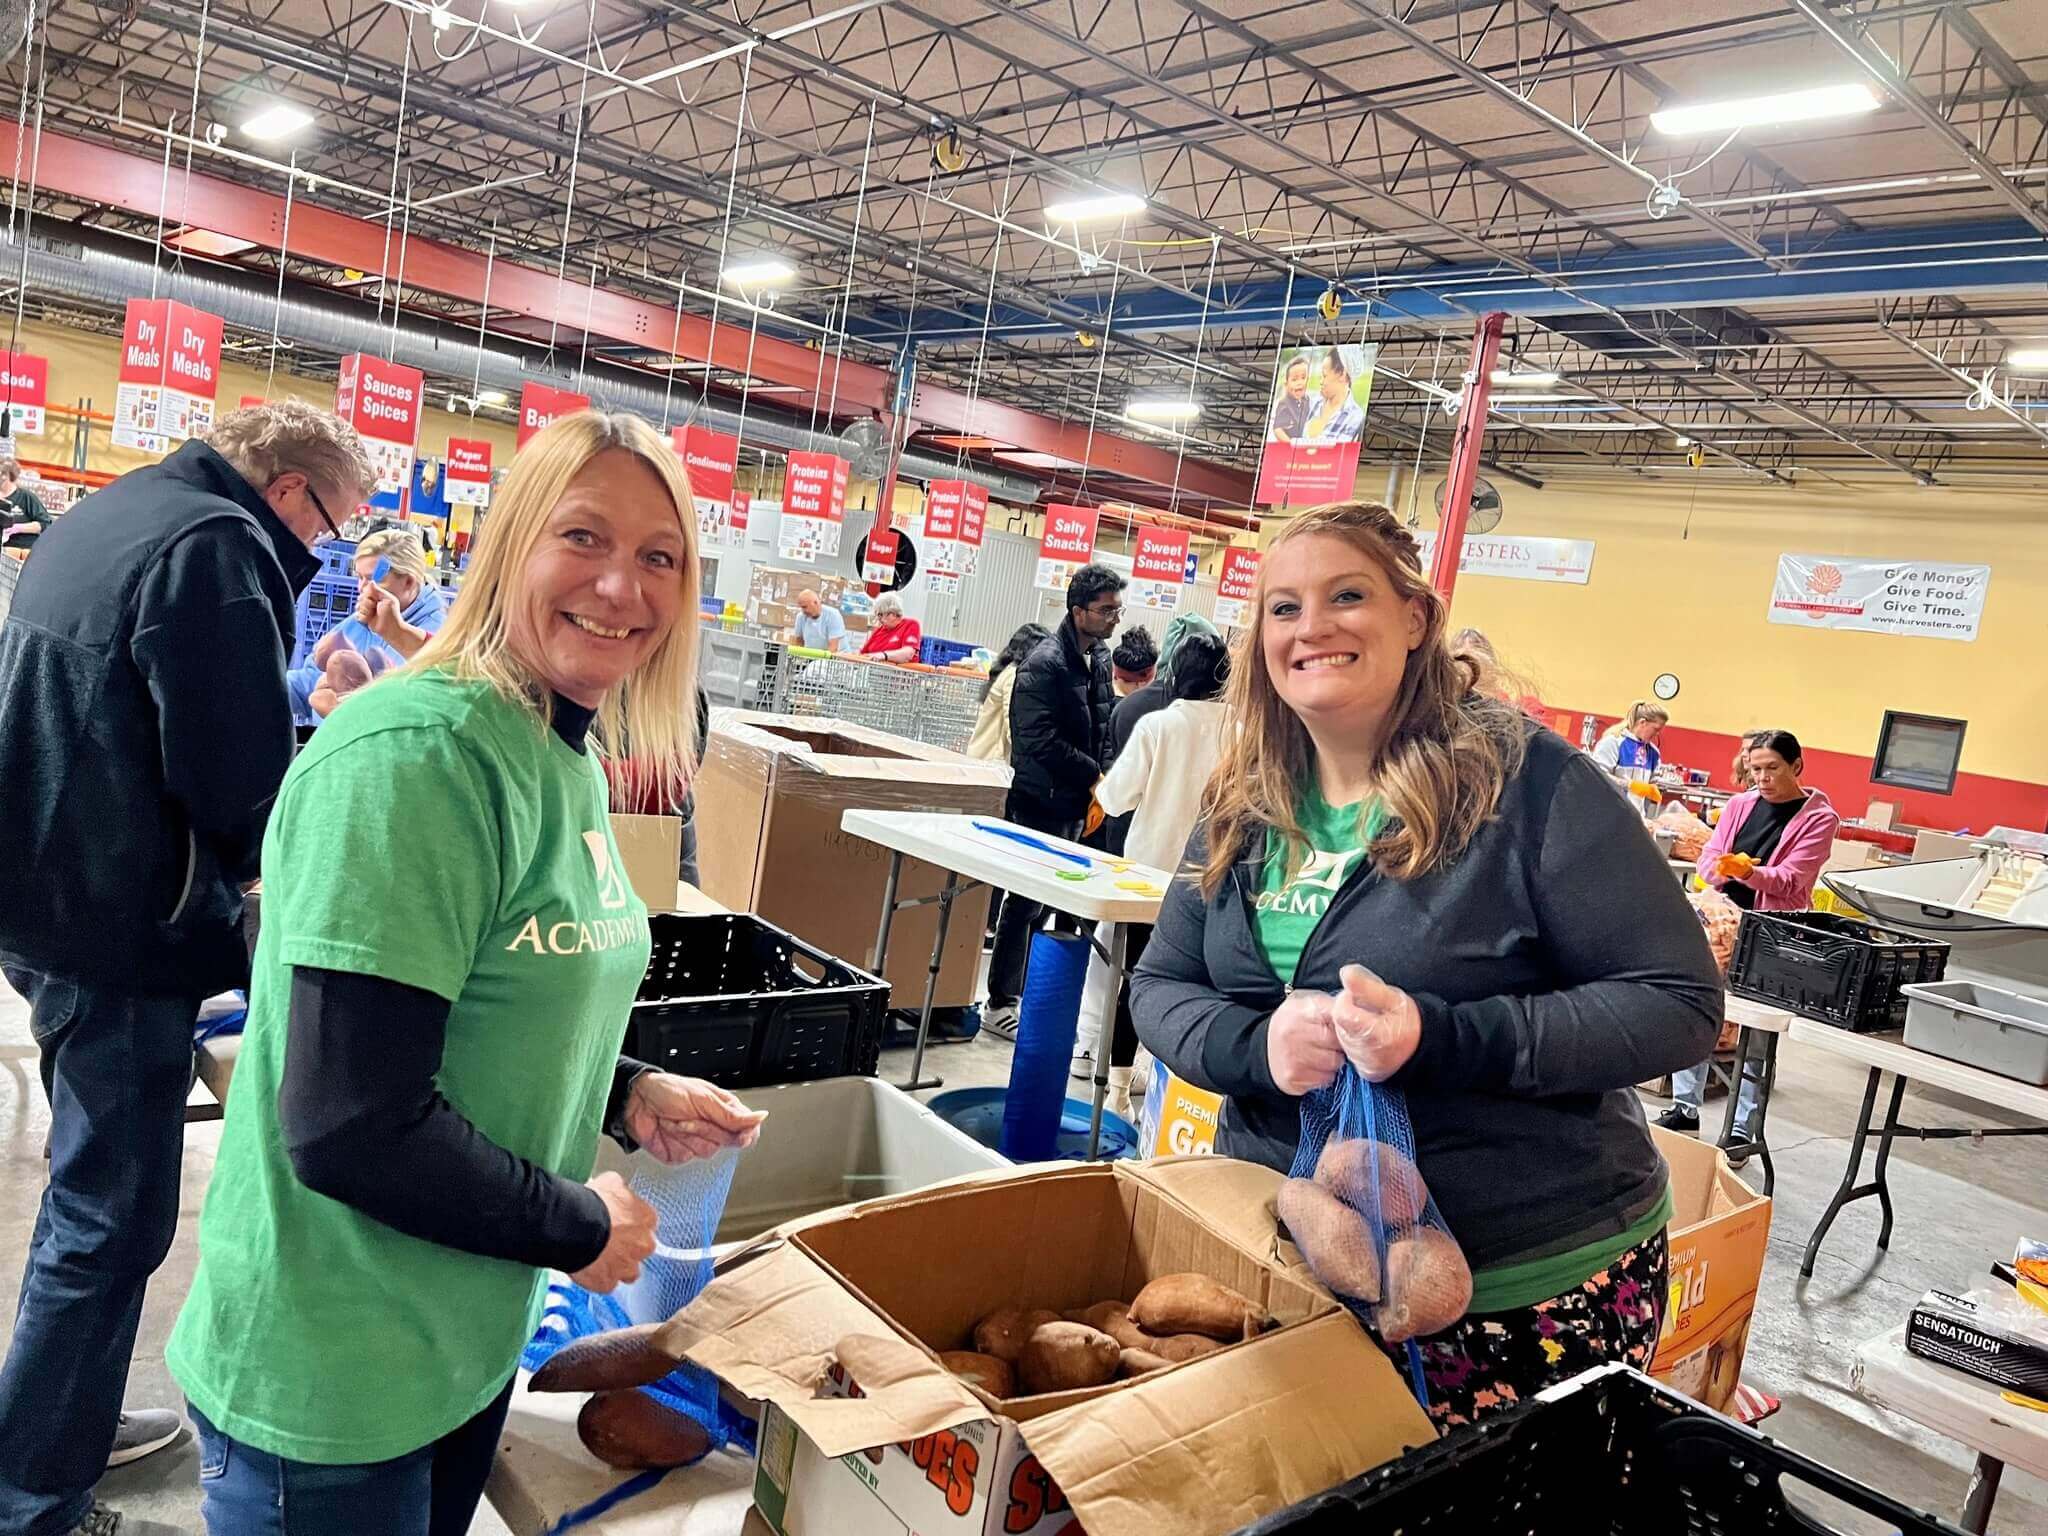 Academy Bank employees pack food boxes for days of giving charity work